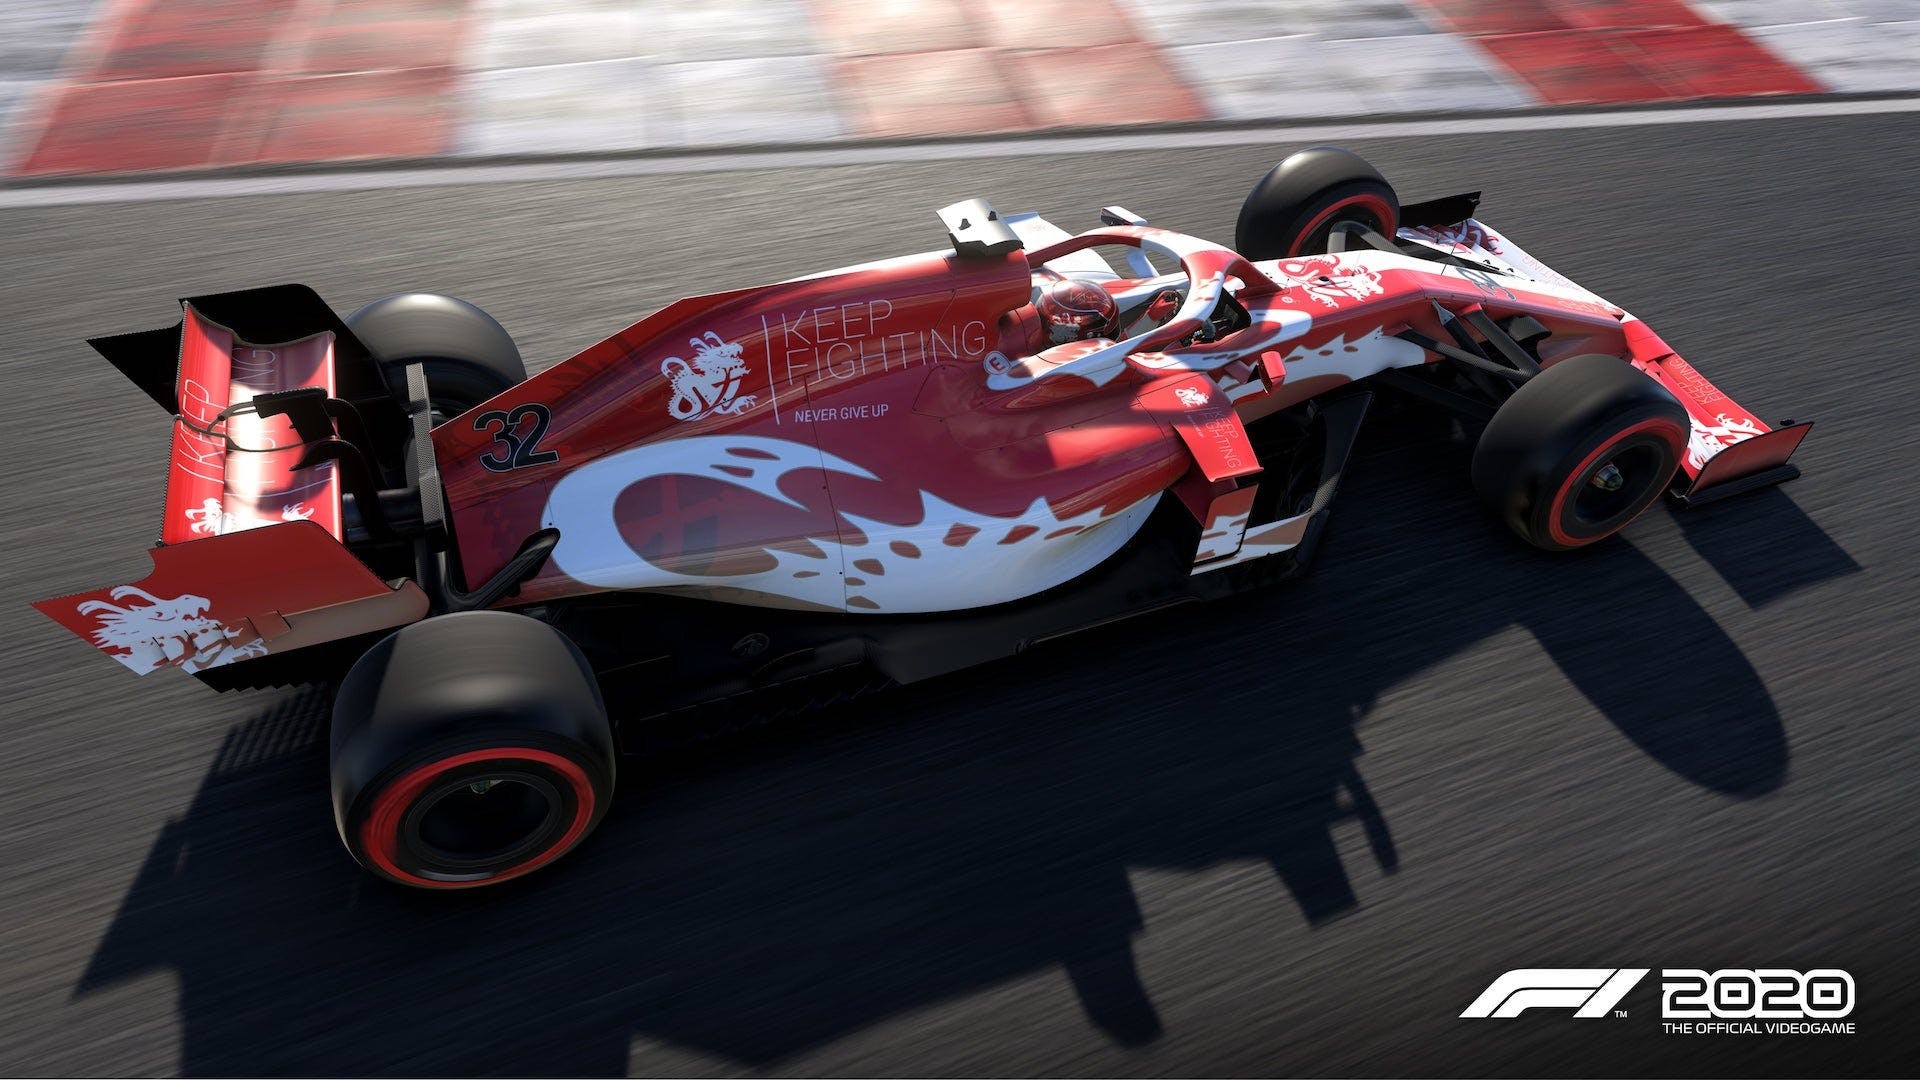 F1 2020 Supports Keep Fighting Foundation In Honour Of Michael Schumacher